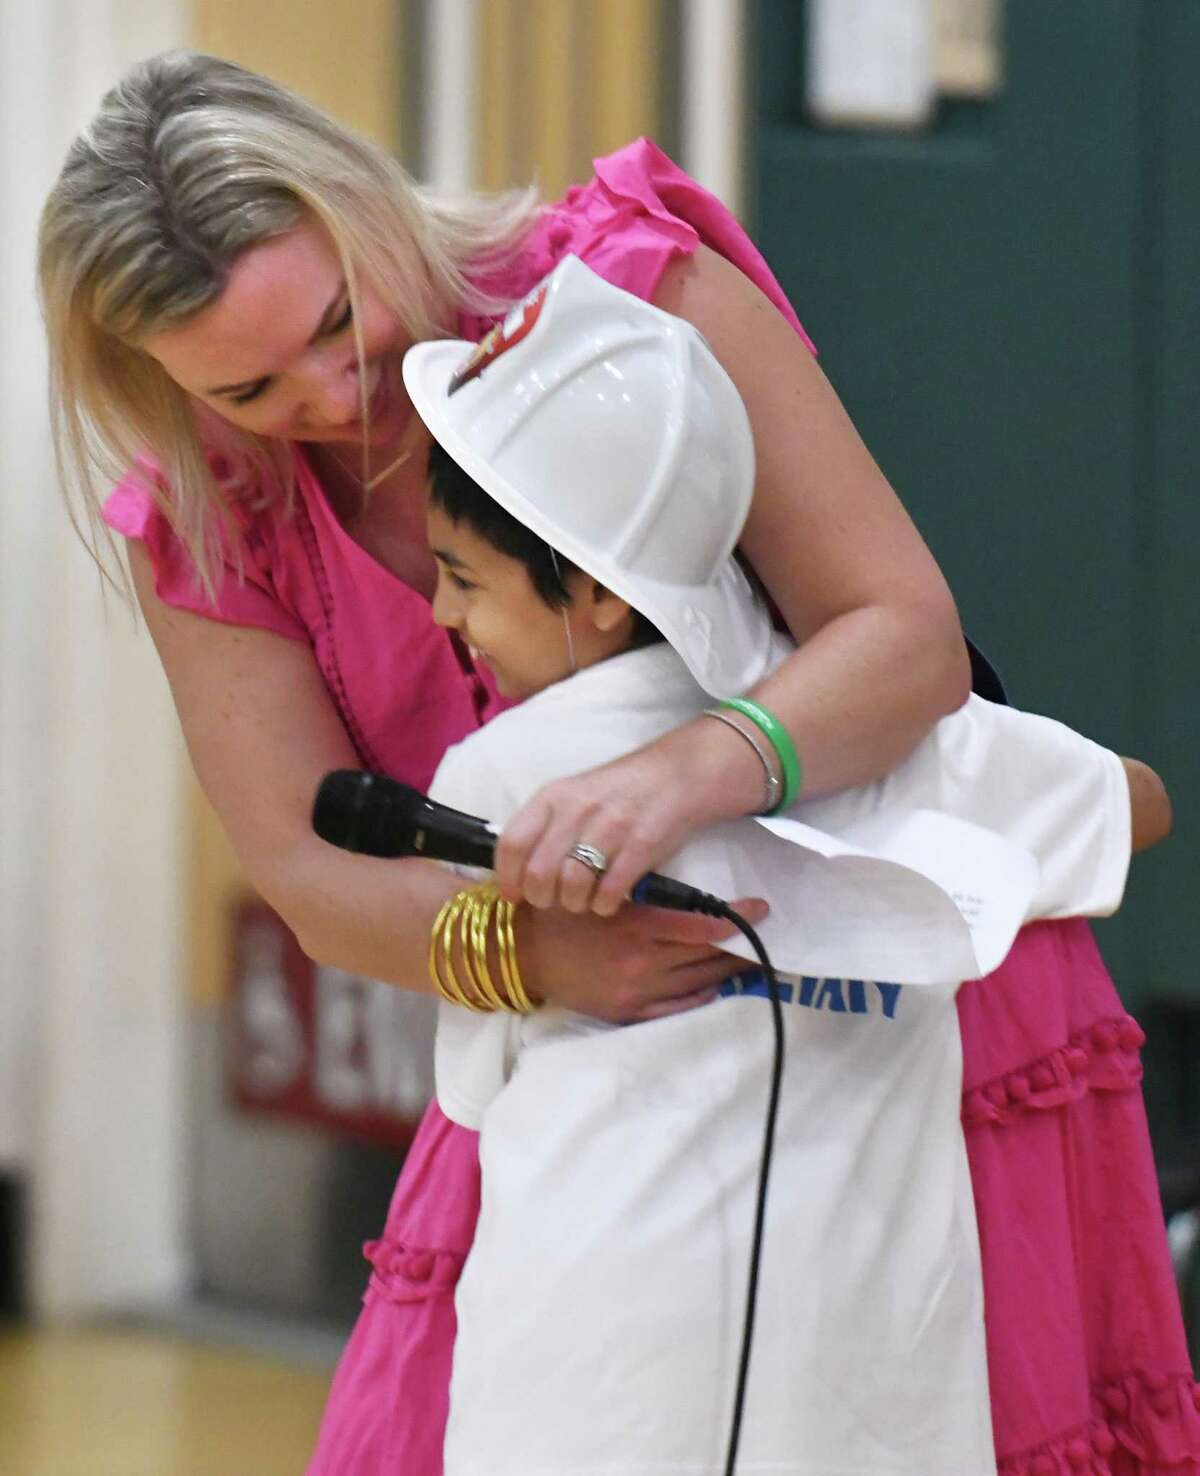 Principal Klara Monaco hugs third-grader Julian McRandal during an assembly at Glenville School in the Glenville section of Greenwich, Conn. Tuesday, June 14, 2022. McRandal, who has brain cancer, was surprised Tuesday morning to be driven to school in a fire truck with a police motorcycle motorcade. The entire school was waiting outside to greet him, give him gifts, and honor him during a school assembly.